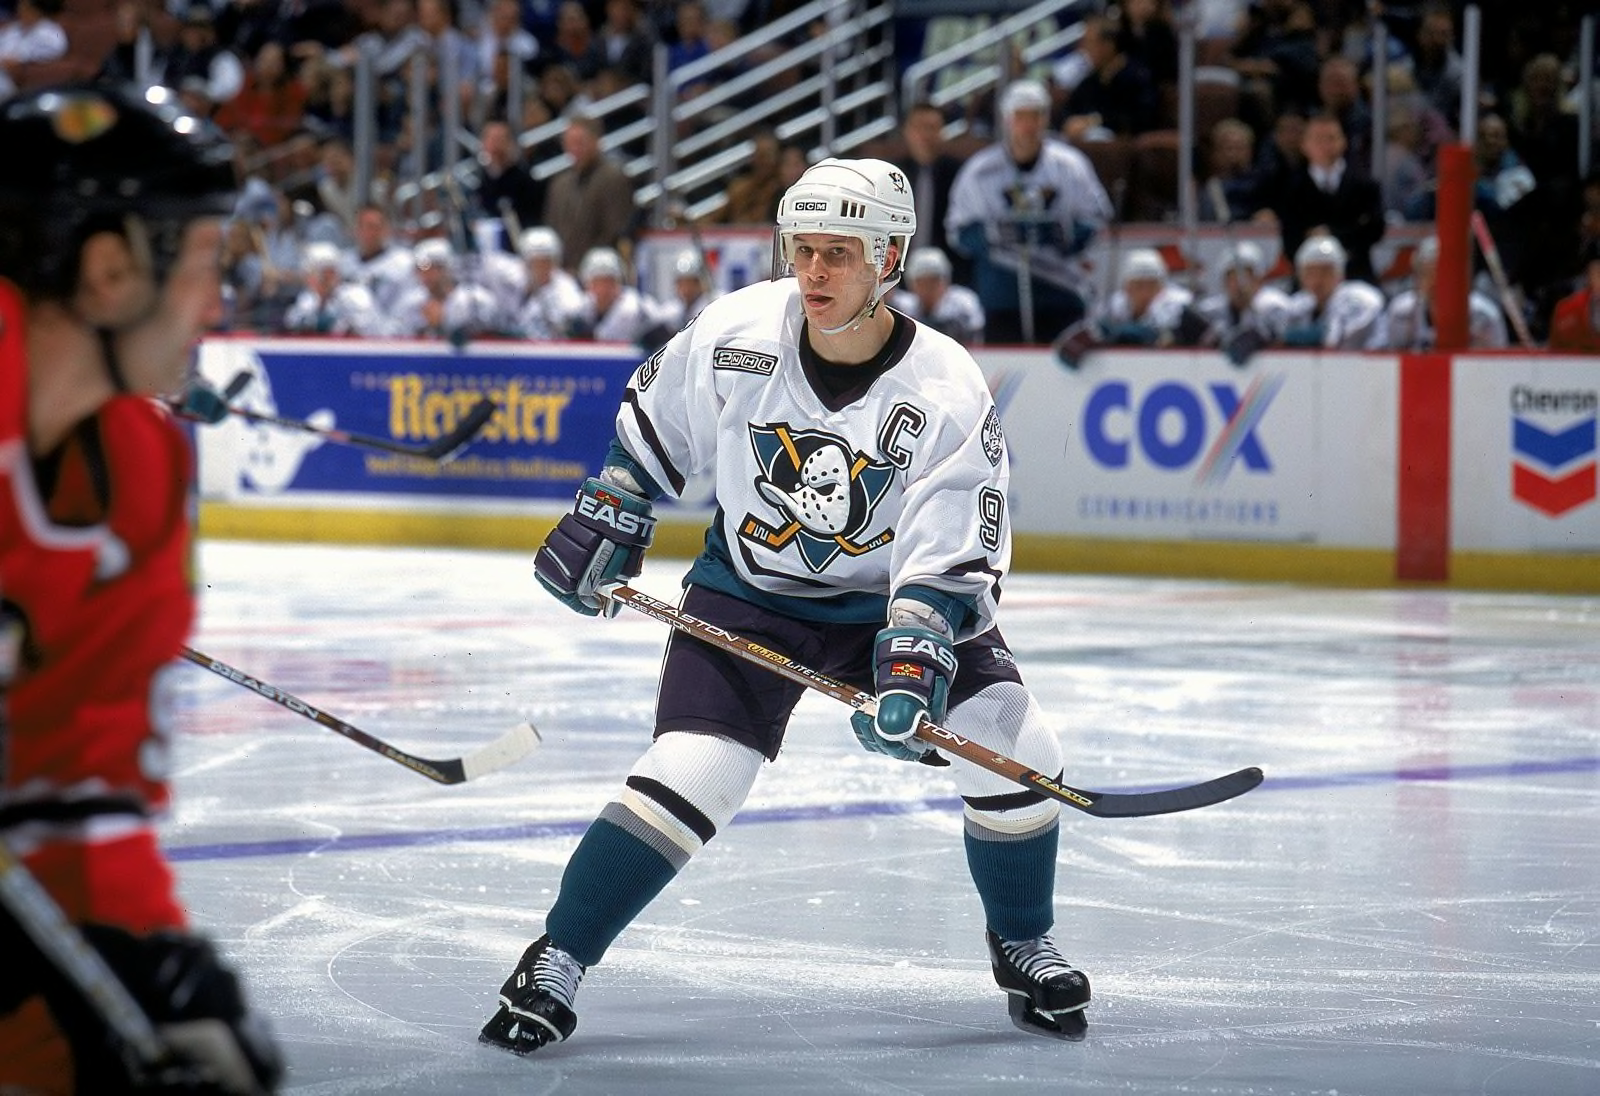 5 best NHL goal horns of all-time in 